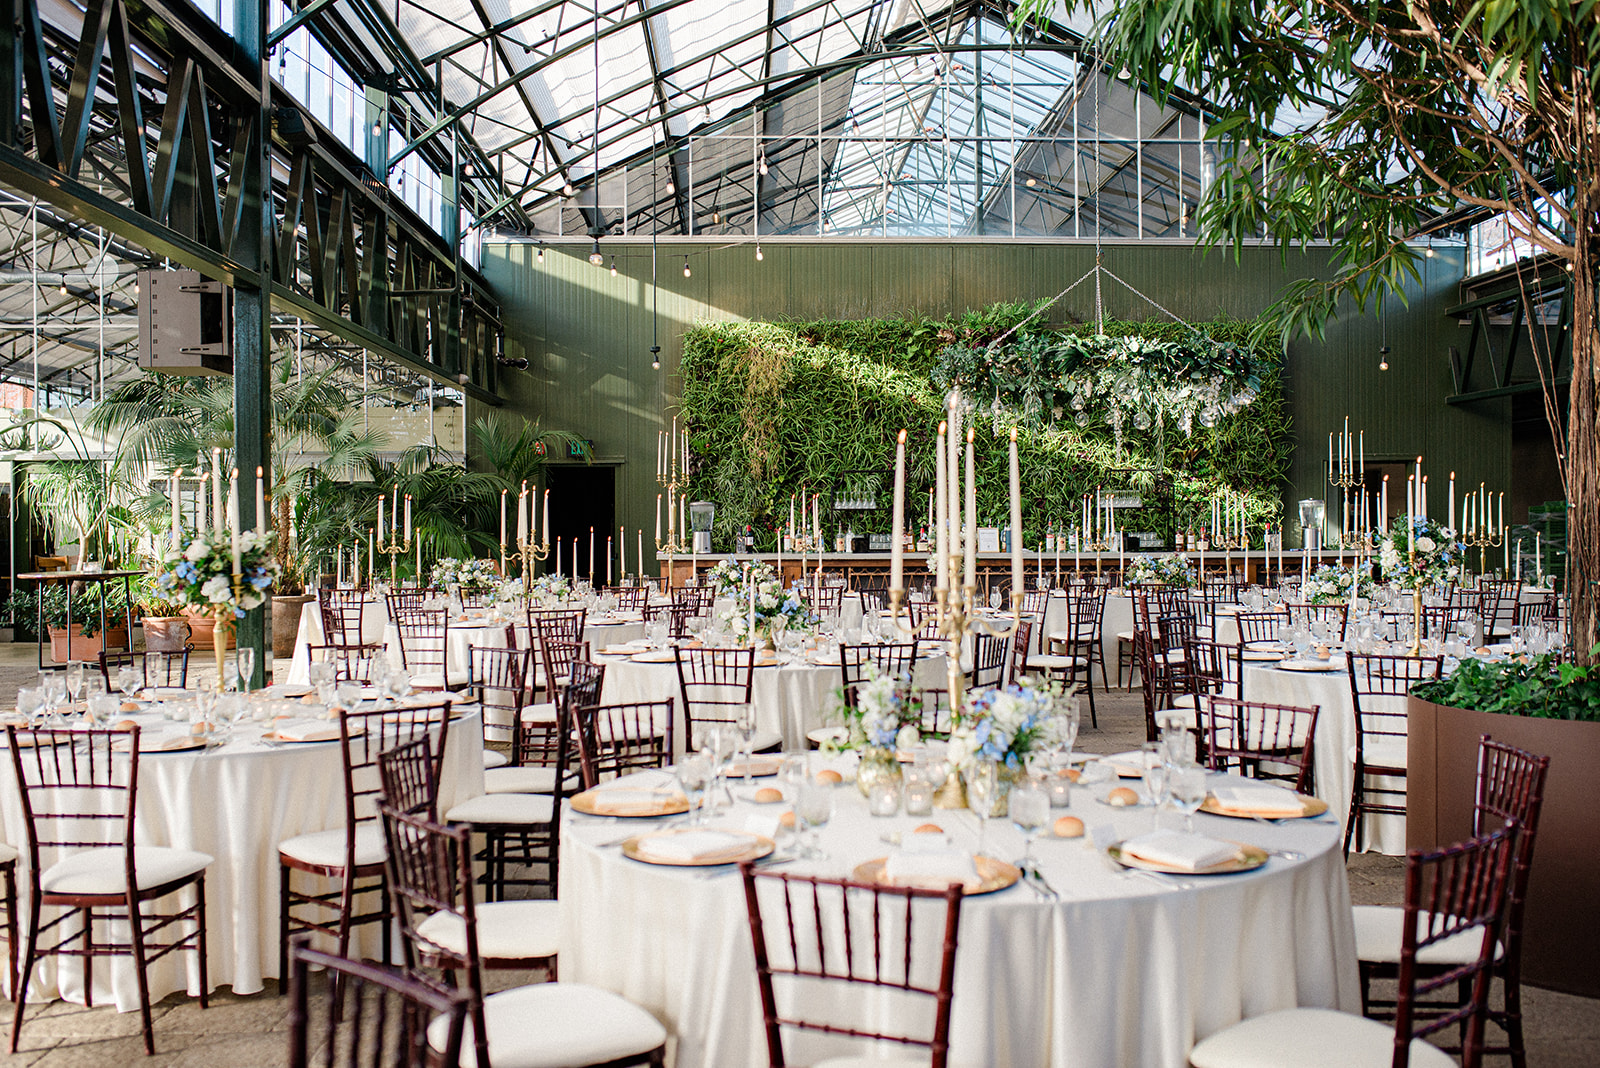 the wedding reception in the greenhouse at Planterra Conservatory in West Bloomfield, Michigan. Plants and Skylights.